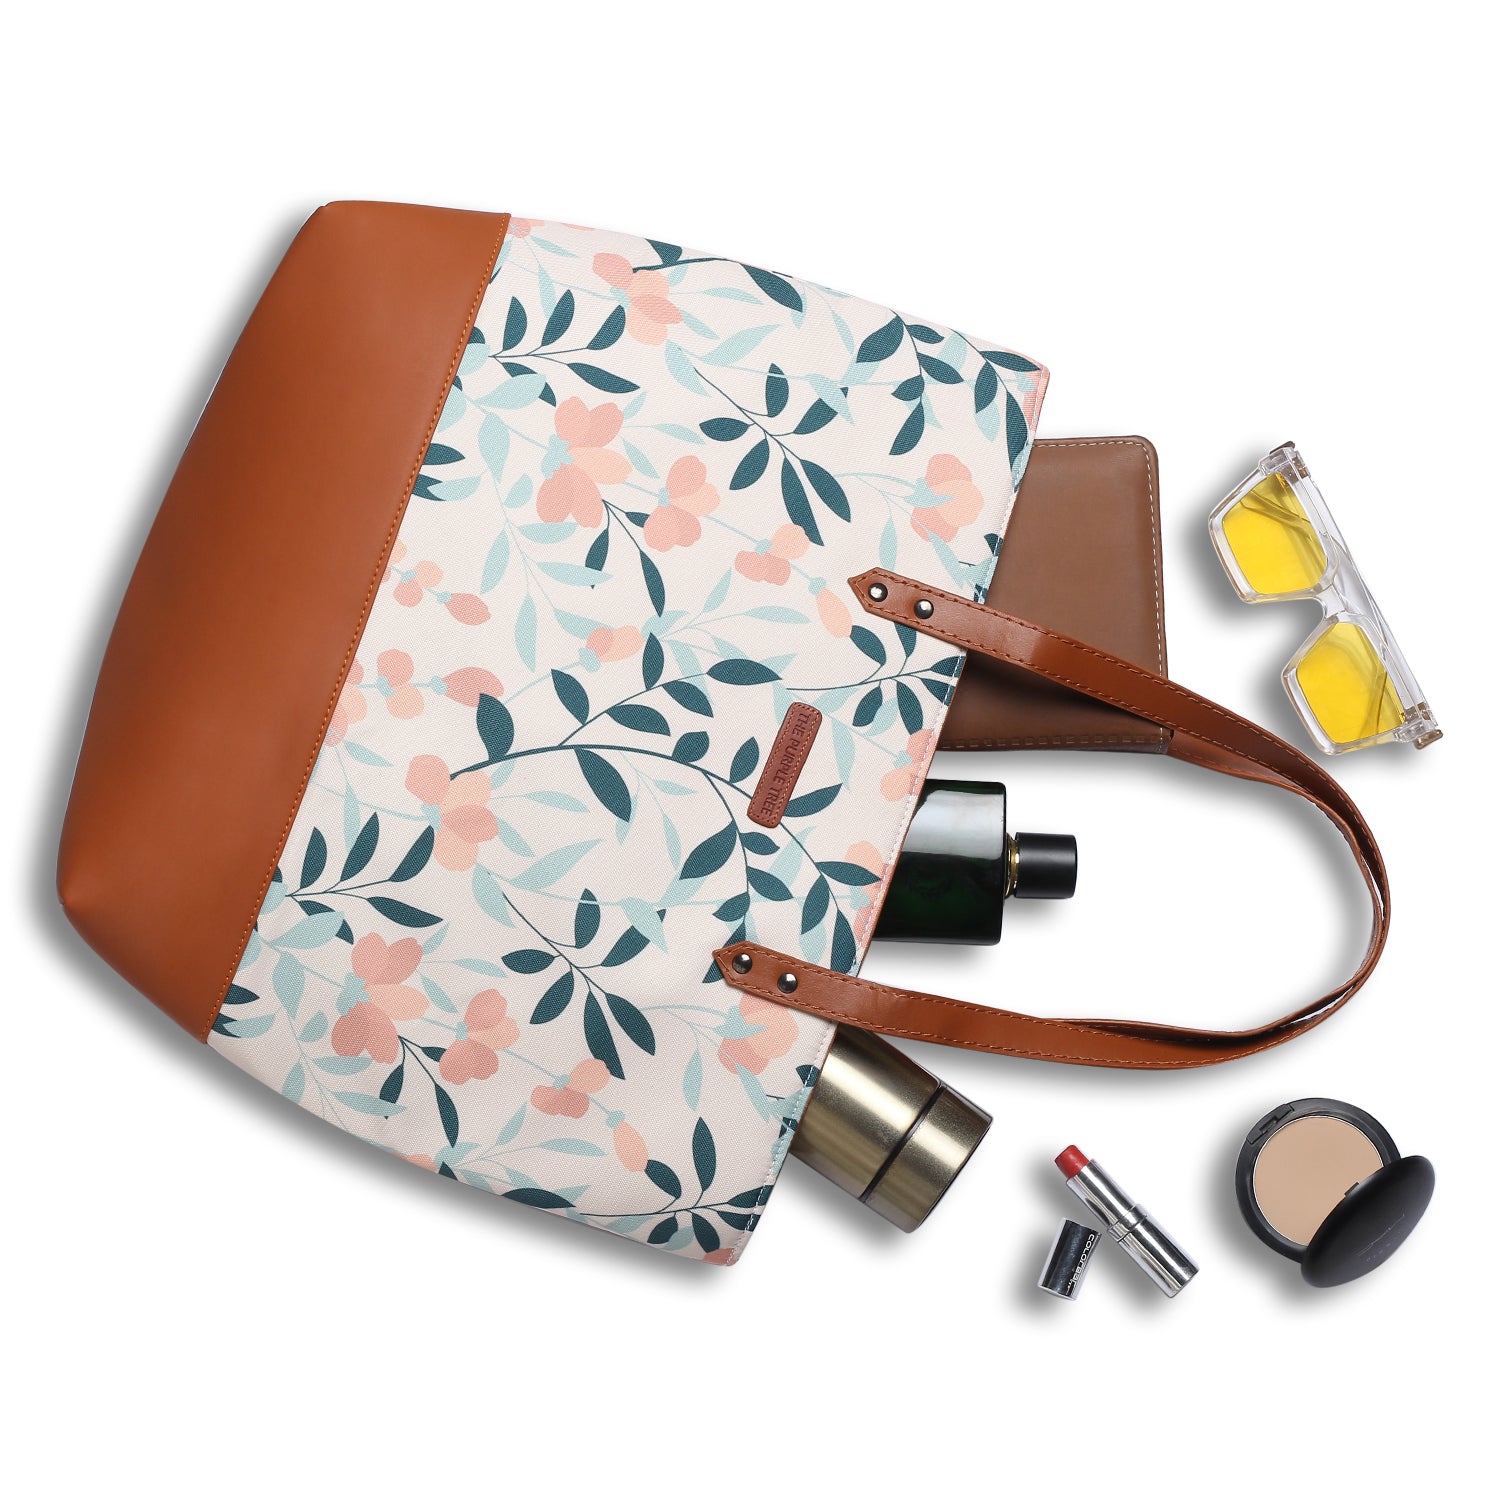 Trendy tote with floral design and brown leather strap